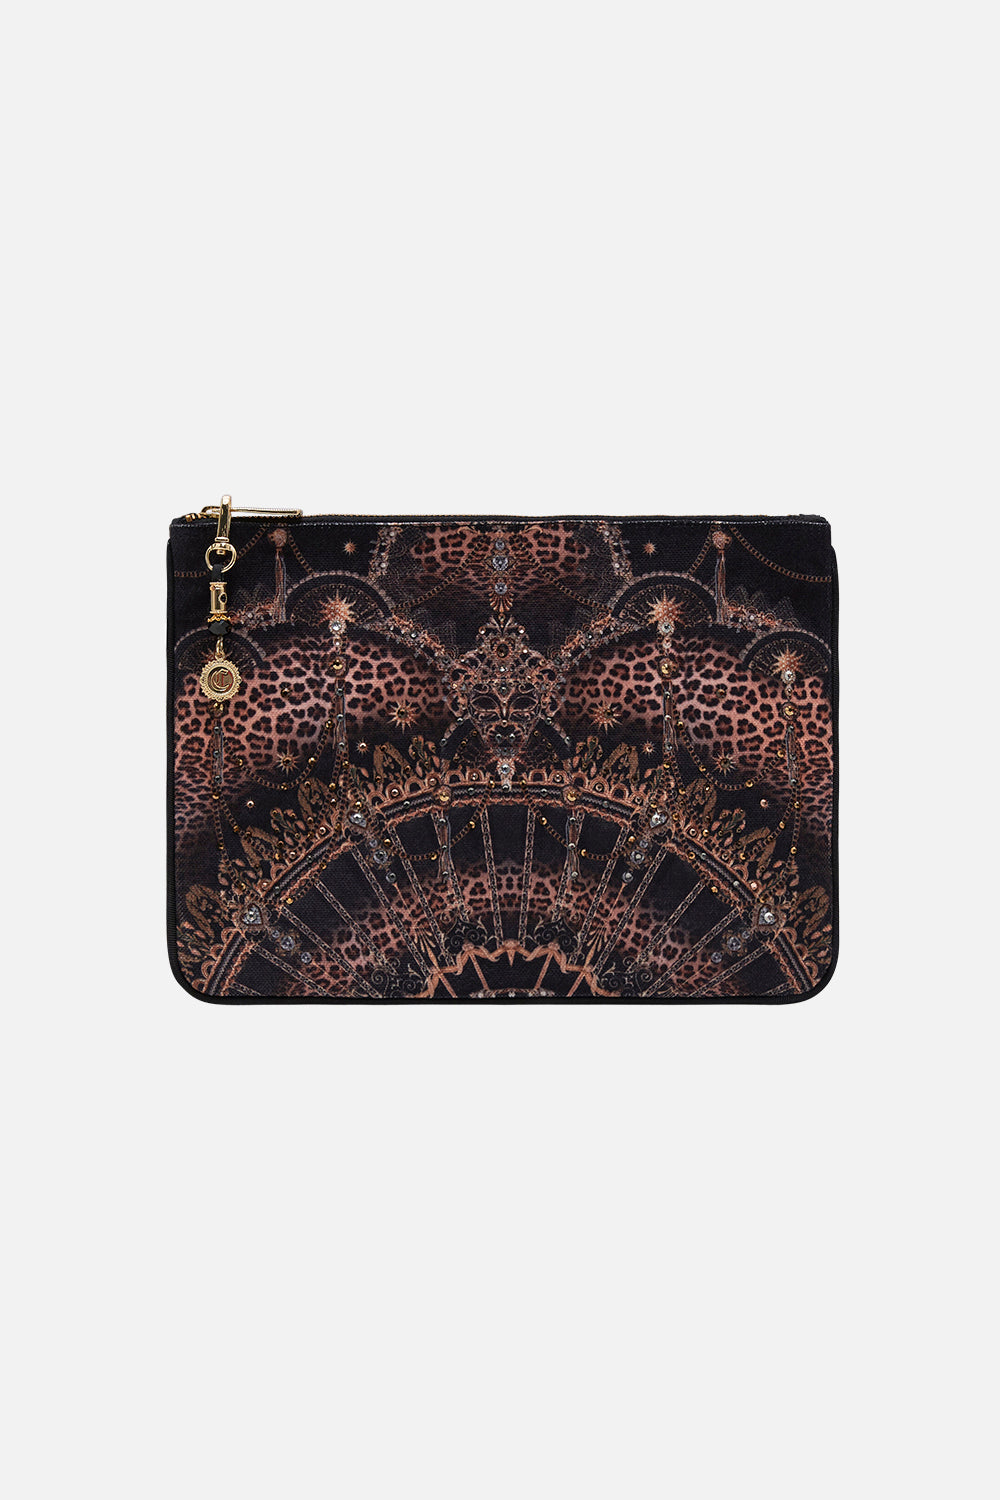 product view of CAMILLA  designer black and gold clutch in Masked At Moonlight print